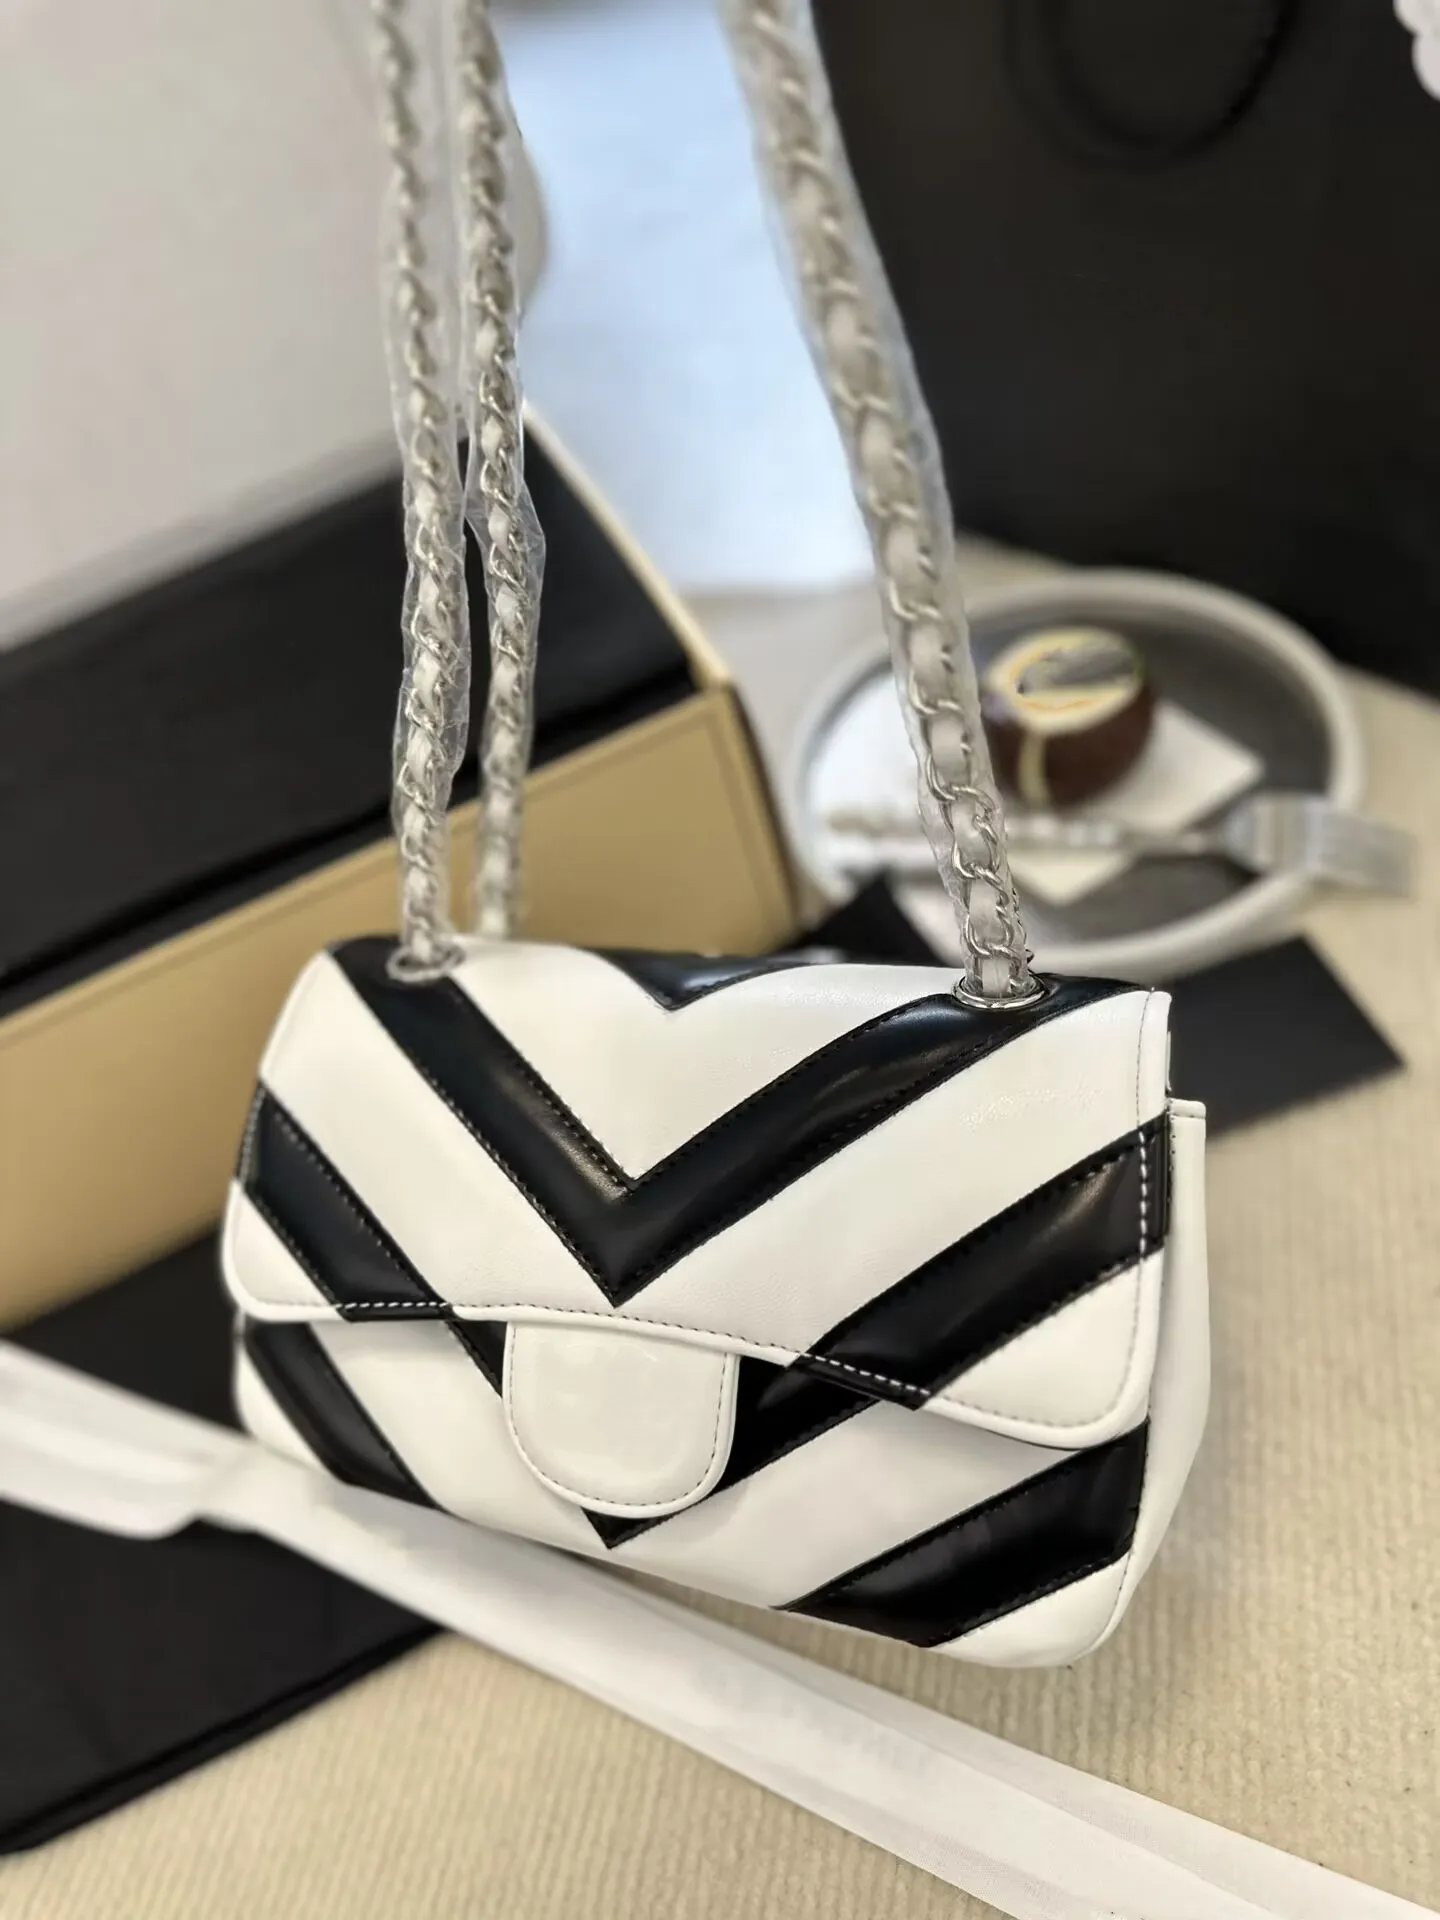 Women Classic Flap Bags Luxury Desinger Vintage High Quality Messenger Pochette 27C Crossbody Shoulder Black and white panda color matching geometry Totes